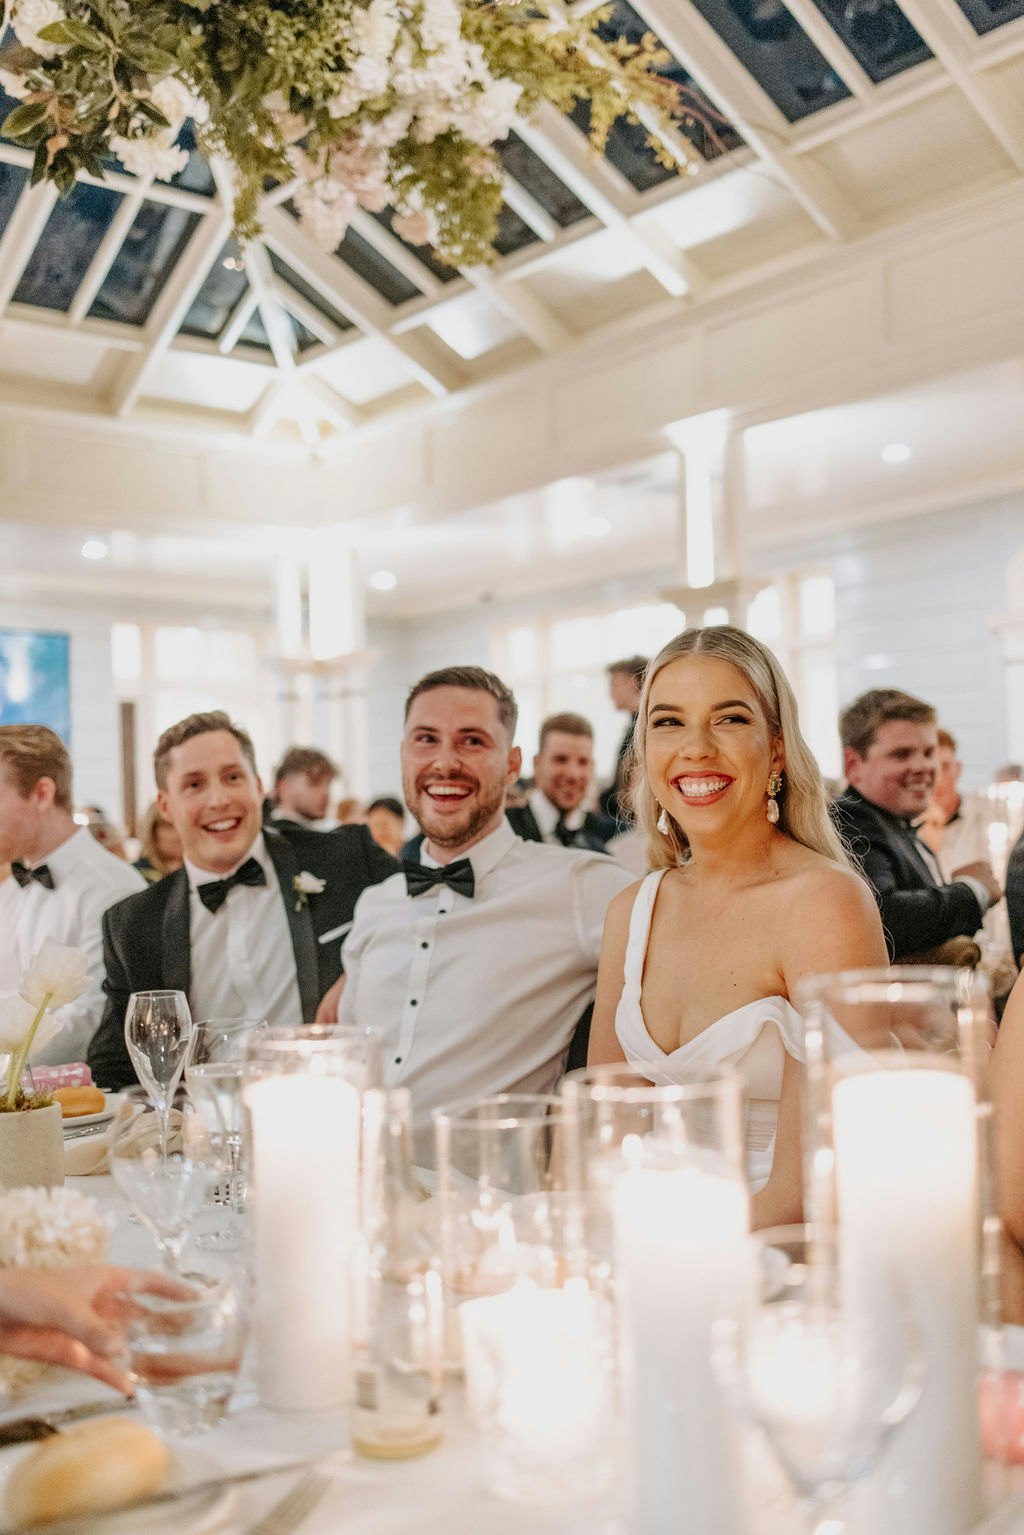 Bride and groom sitting at table laughing